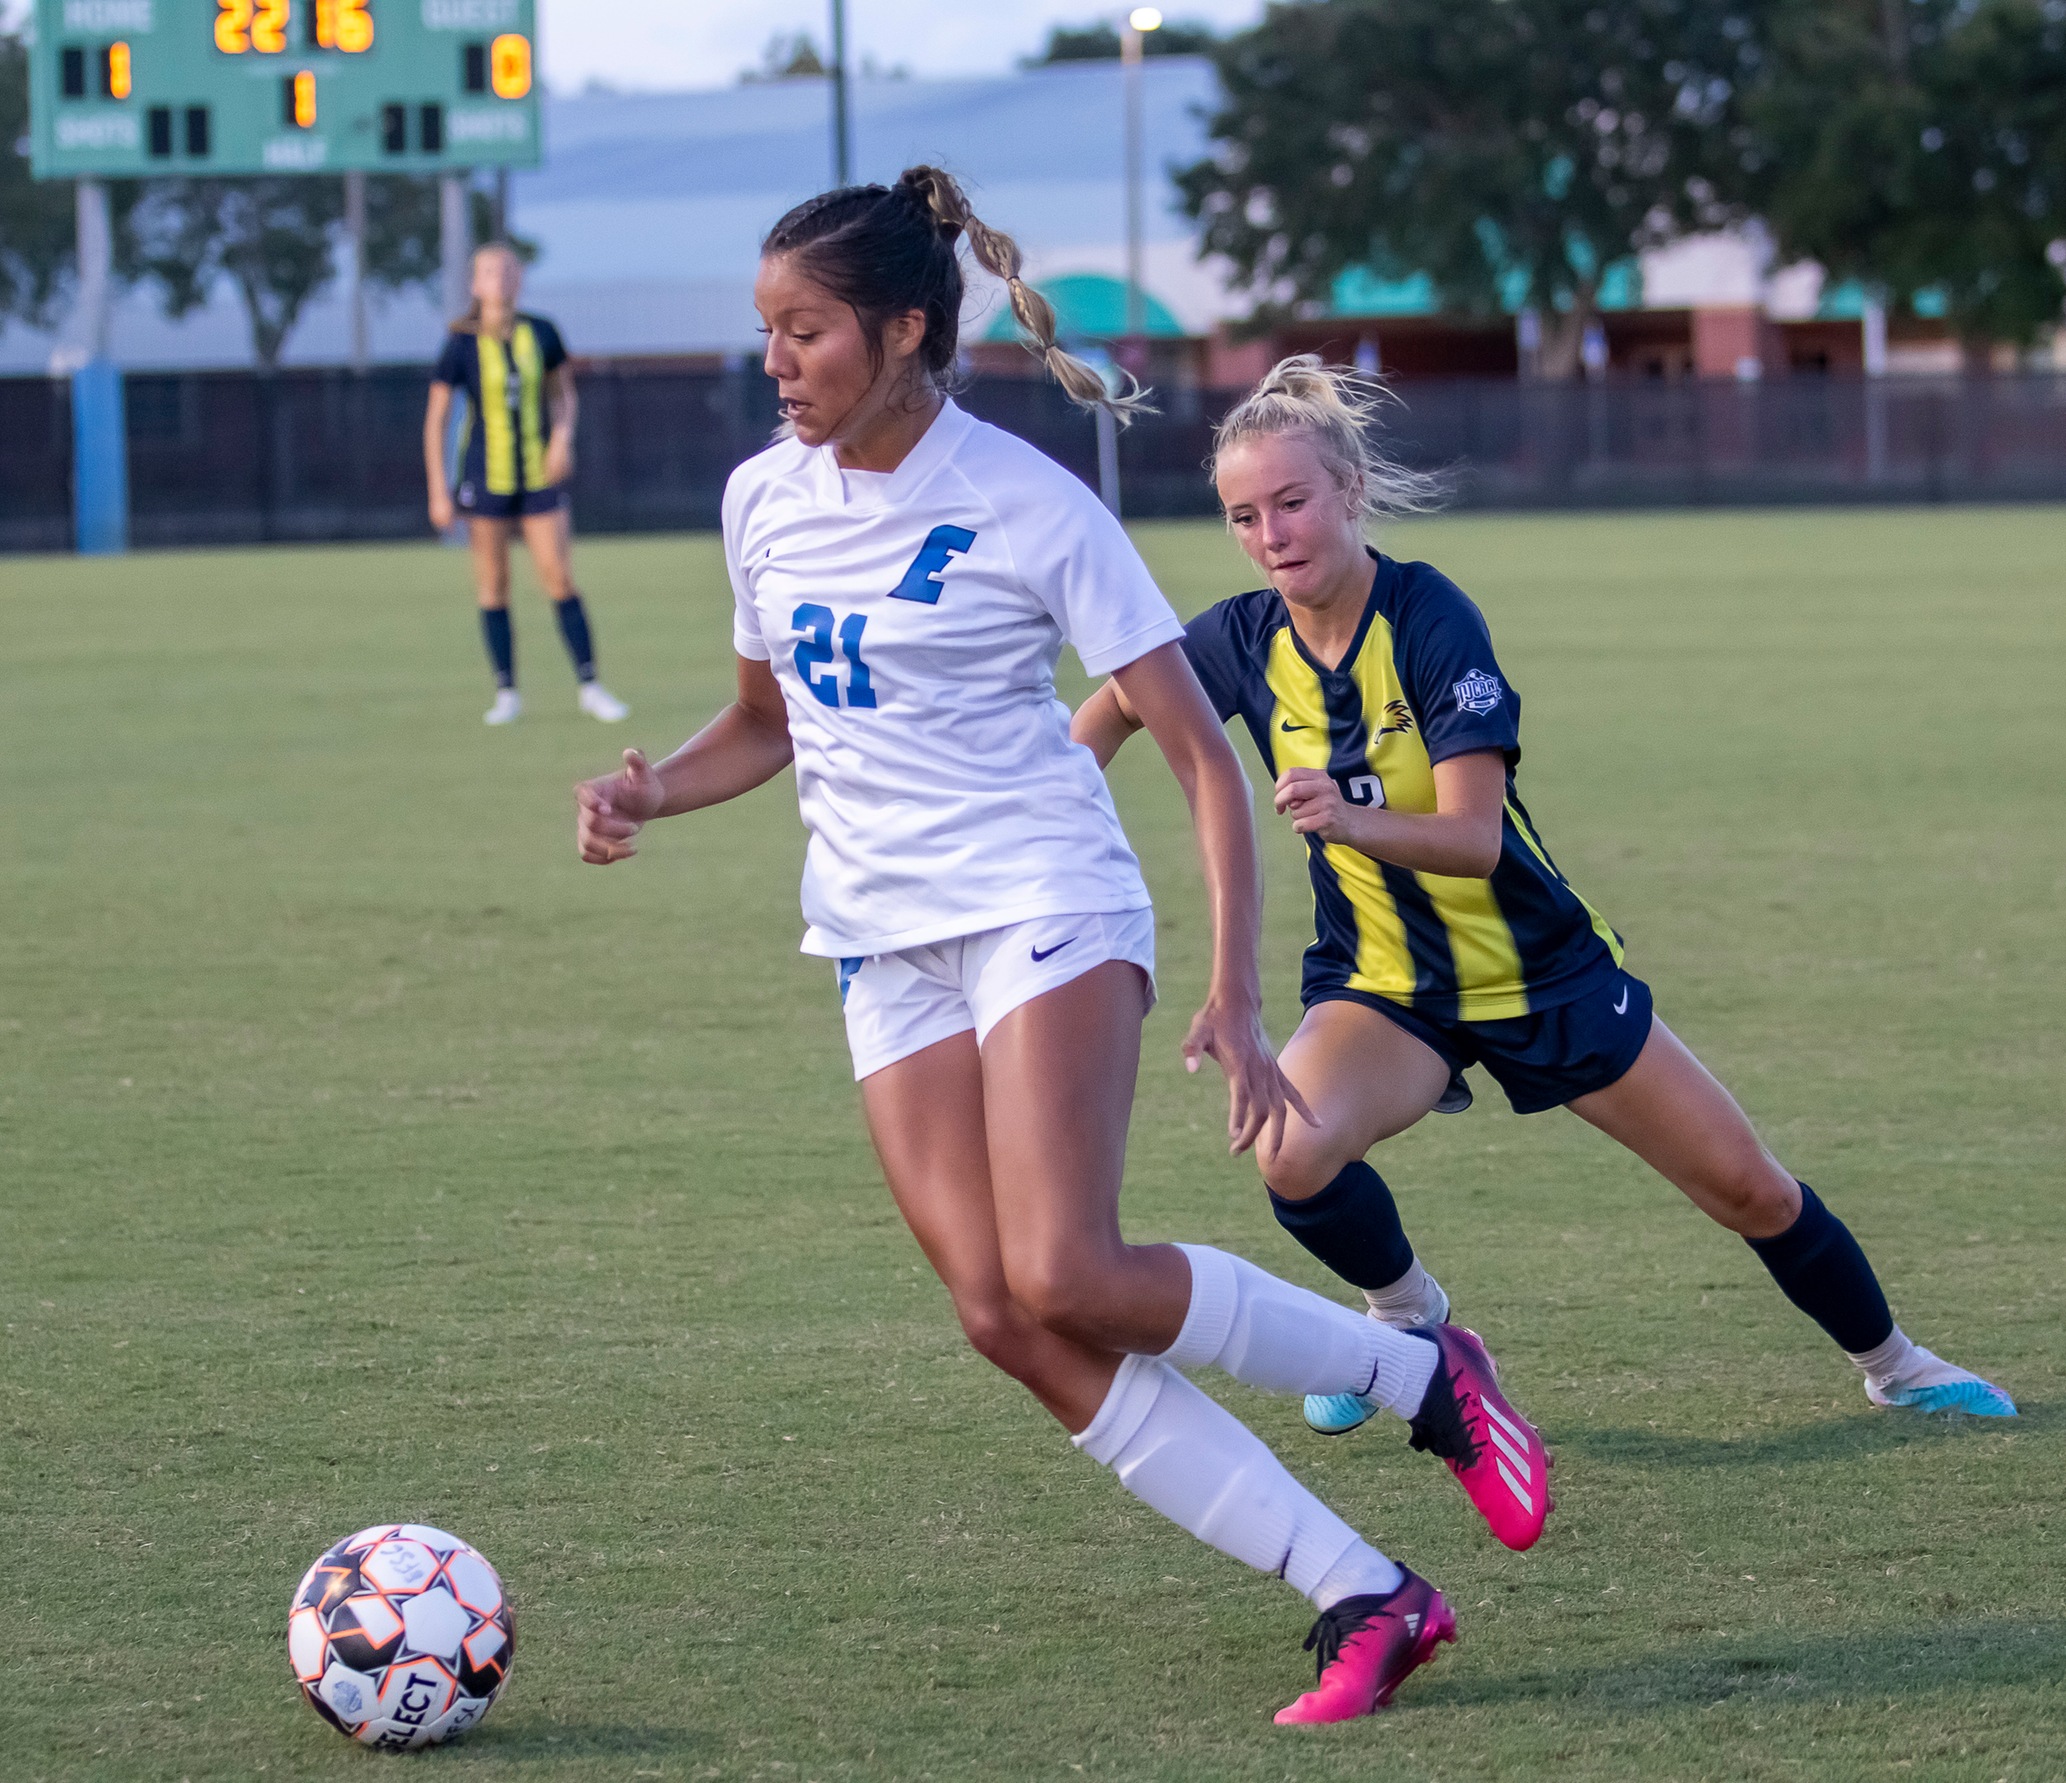 Nancy Almanza playing well for women's soccer team